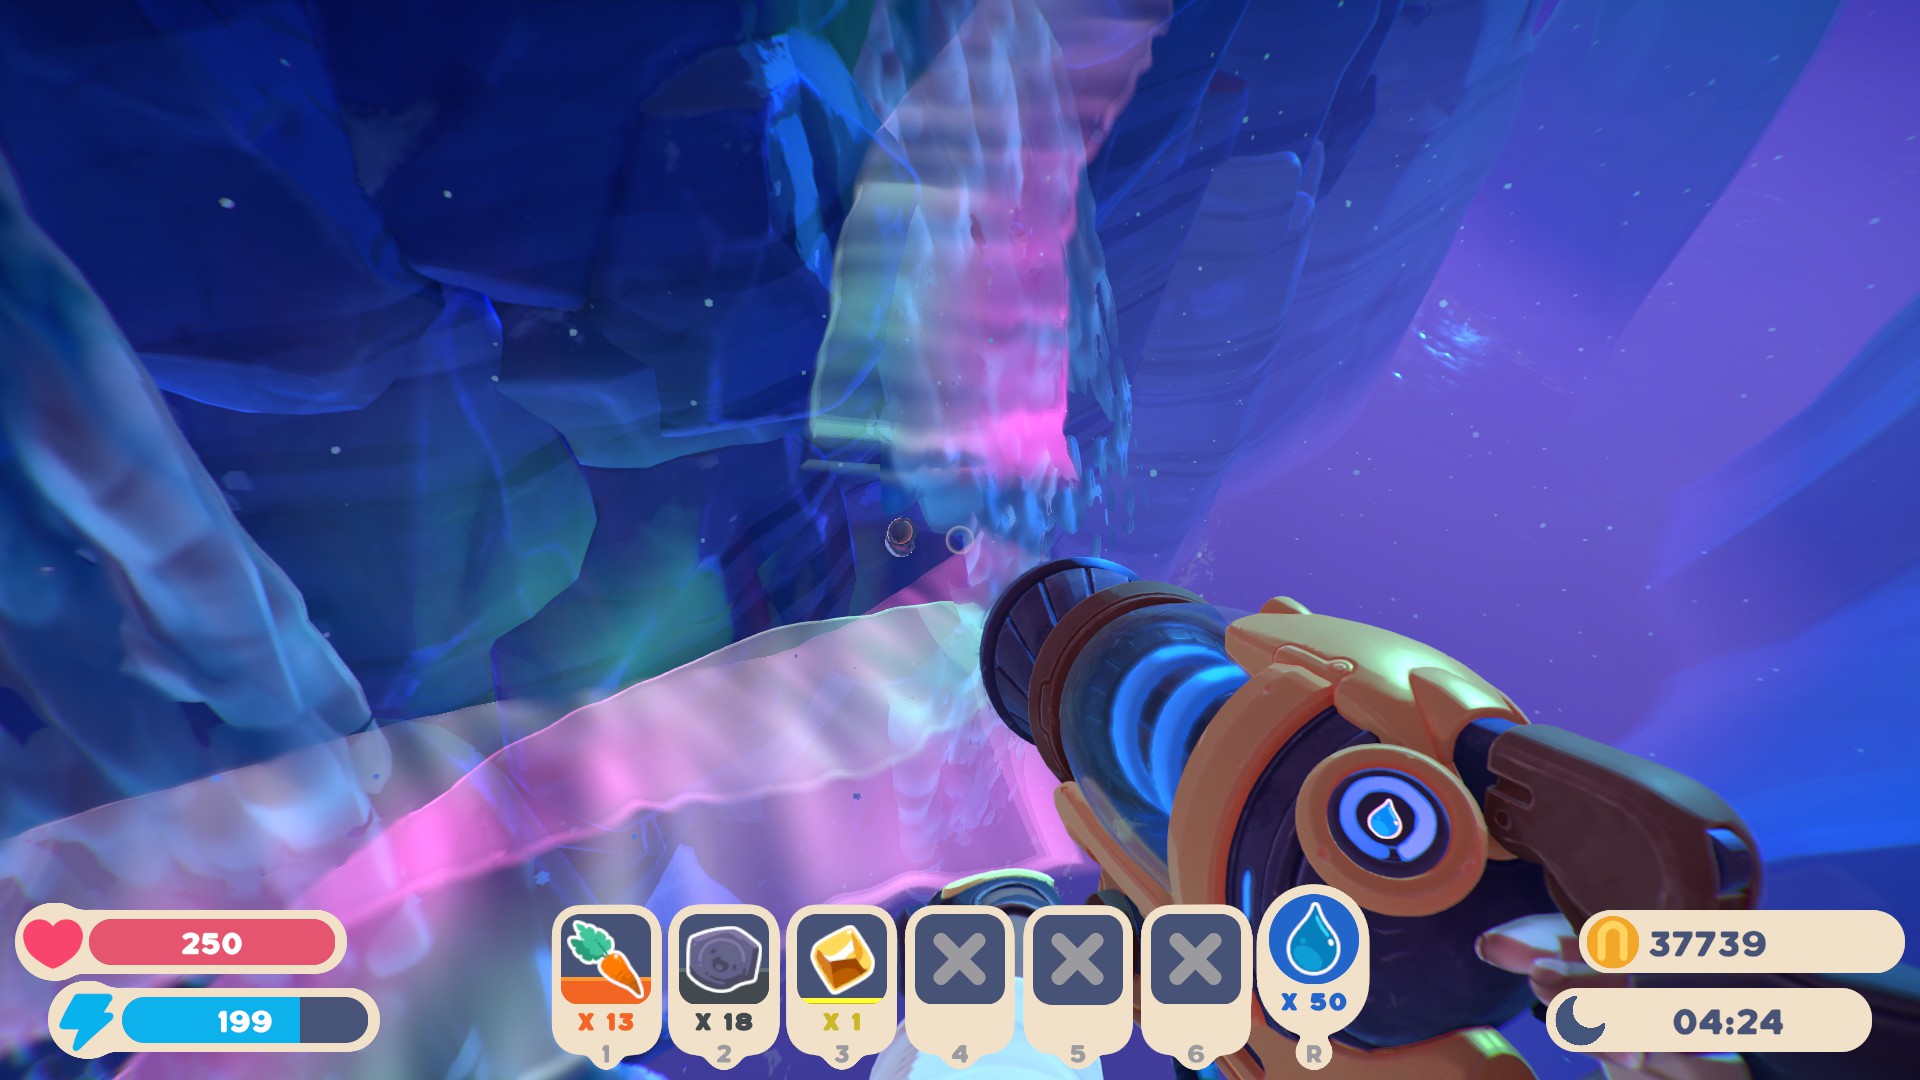 Slime Rancher 2 - Capsule Locations for Powderfall Bluffs - Pods 13 - 20 (Exterior II) - 33837DA